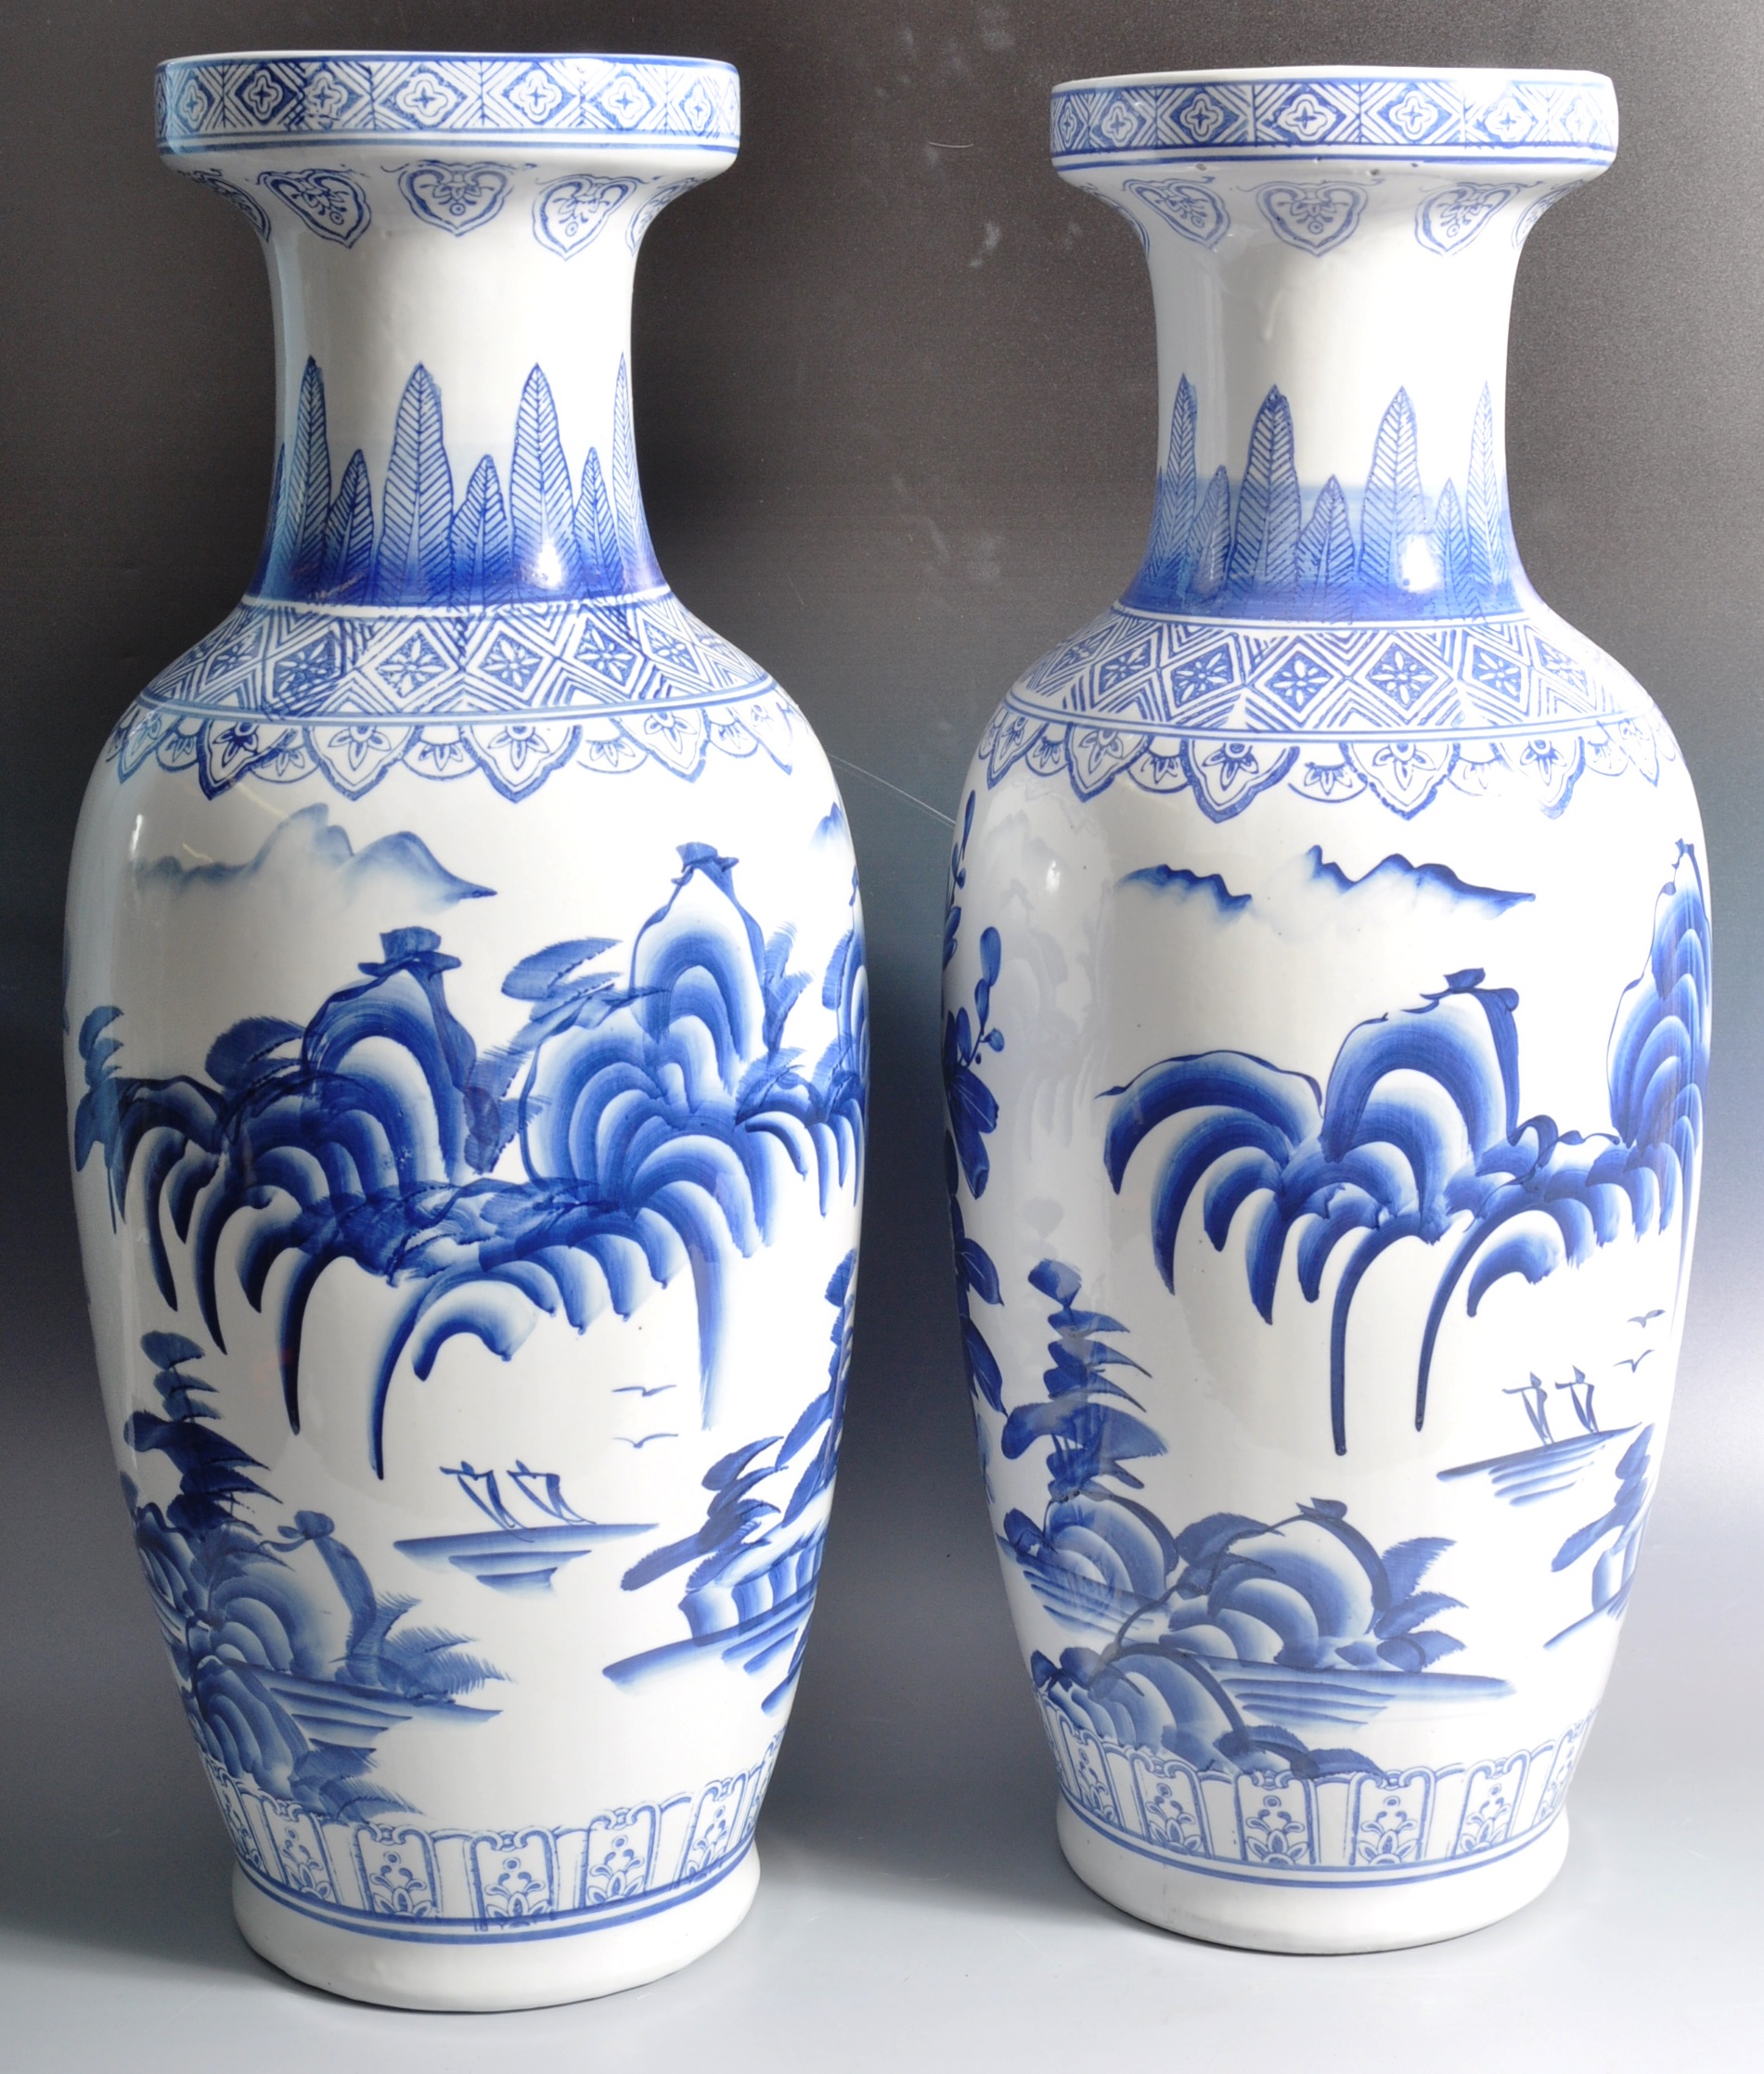 PAIR OF 20TH CENTURY DECORATIVE CHINESE VASES - Image 7 of 10